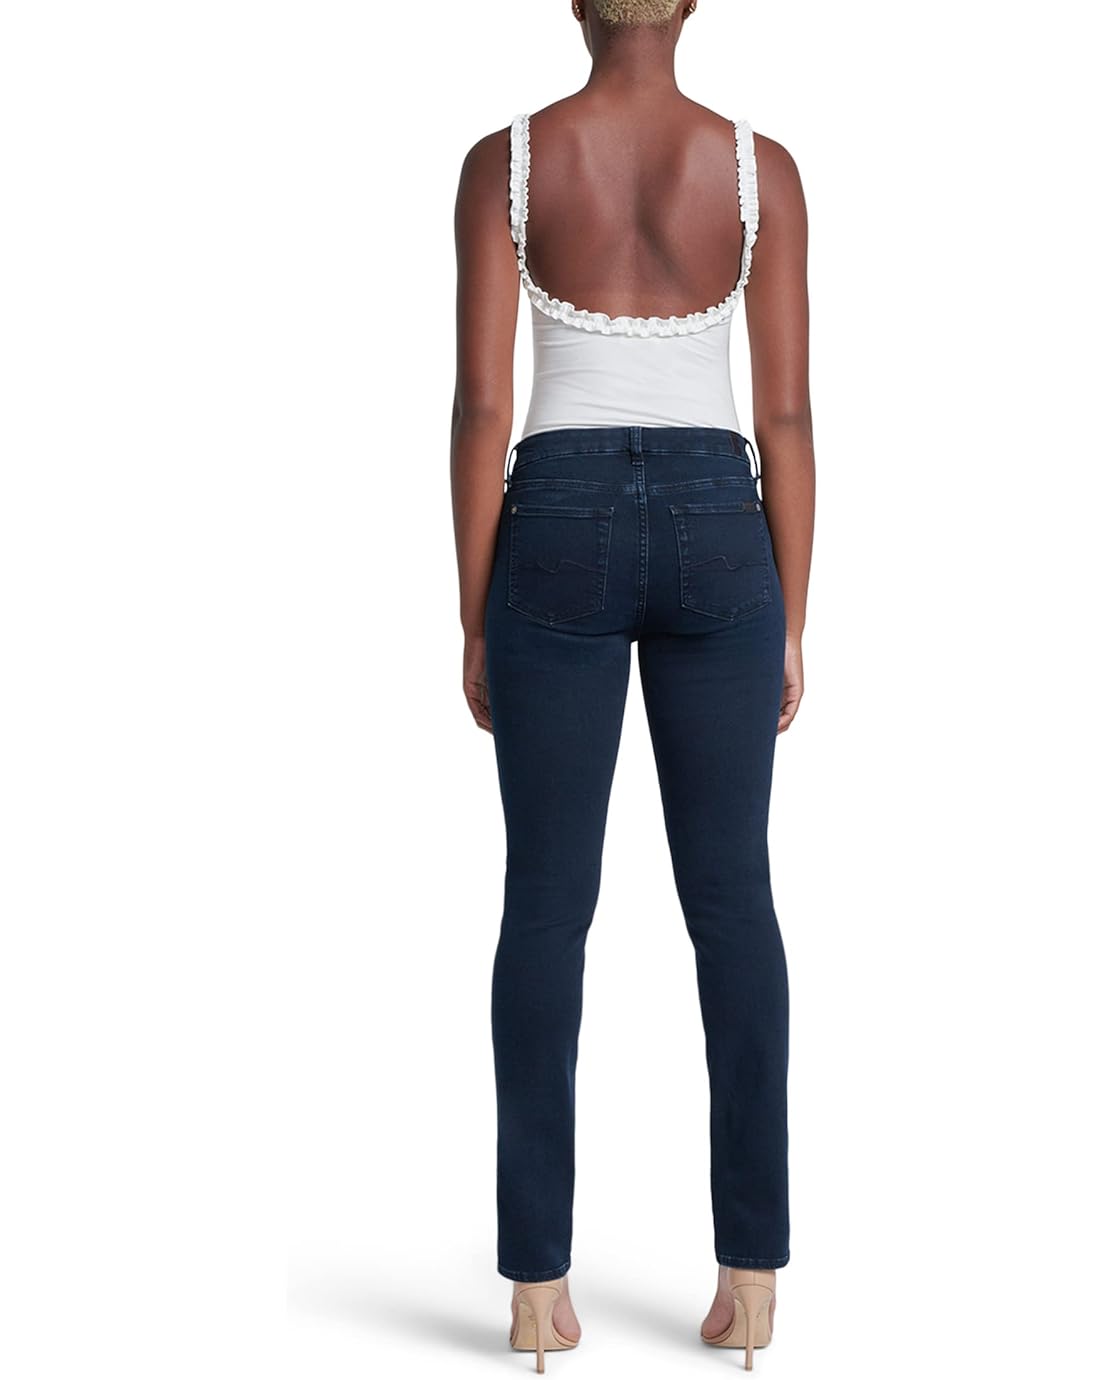  7 For All Mankind Kimmie Straight in Seren